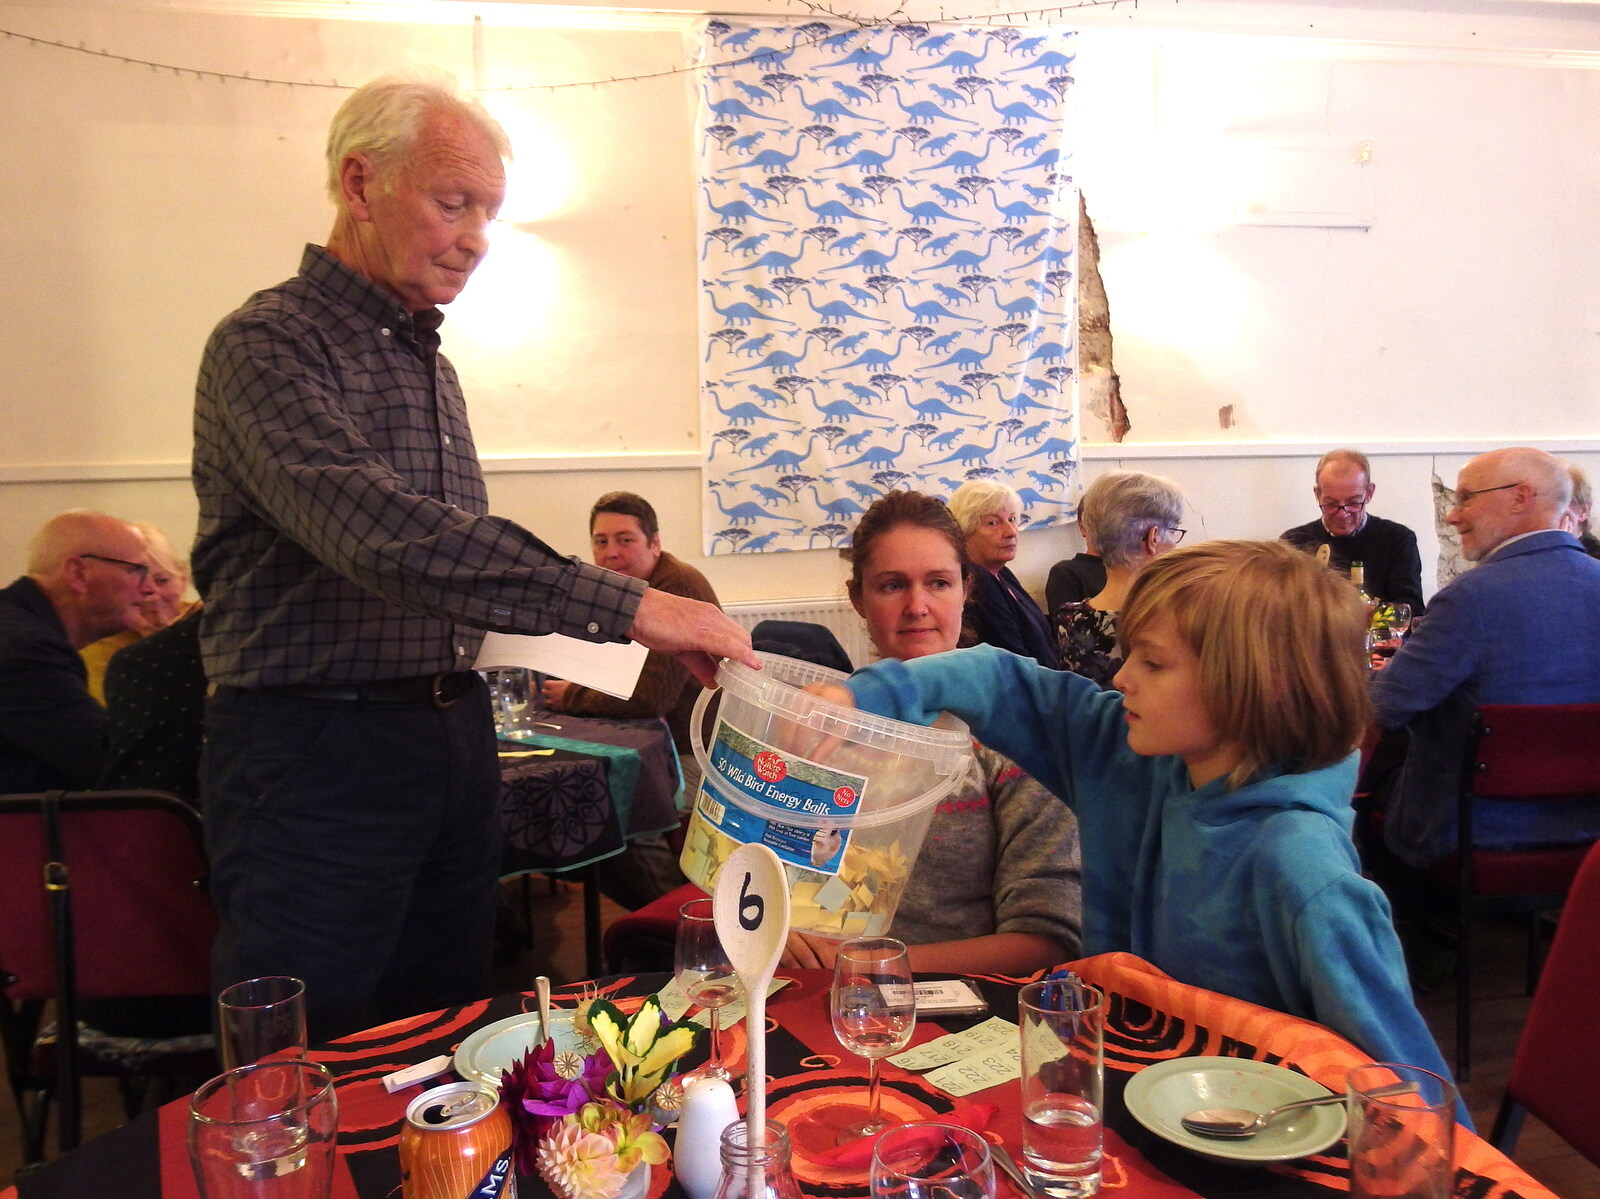 Harry helps draw out a raffle ticket from Sunday Lunch at the Village Hall, Brome, Suffolk - 10th October 2021